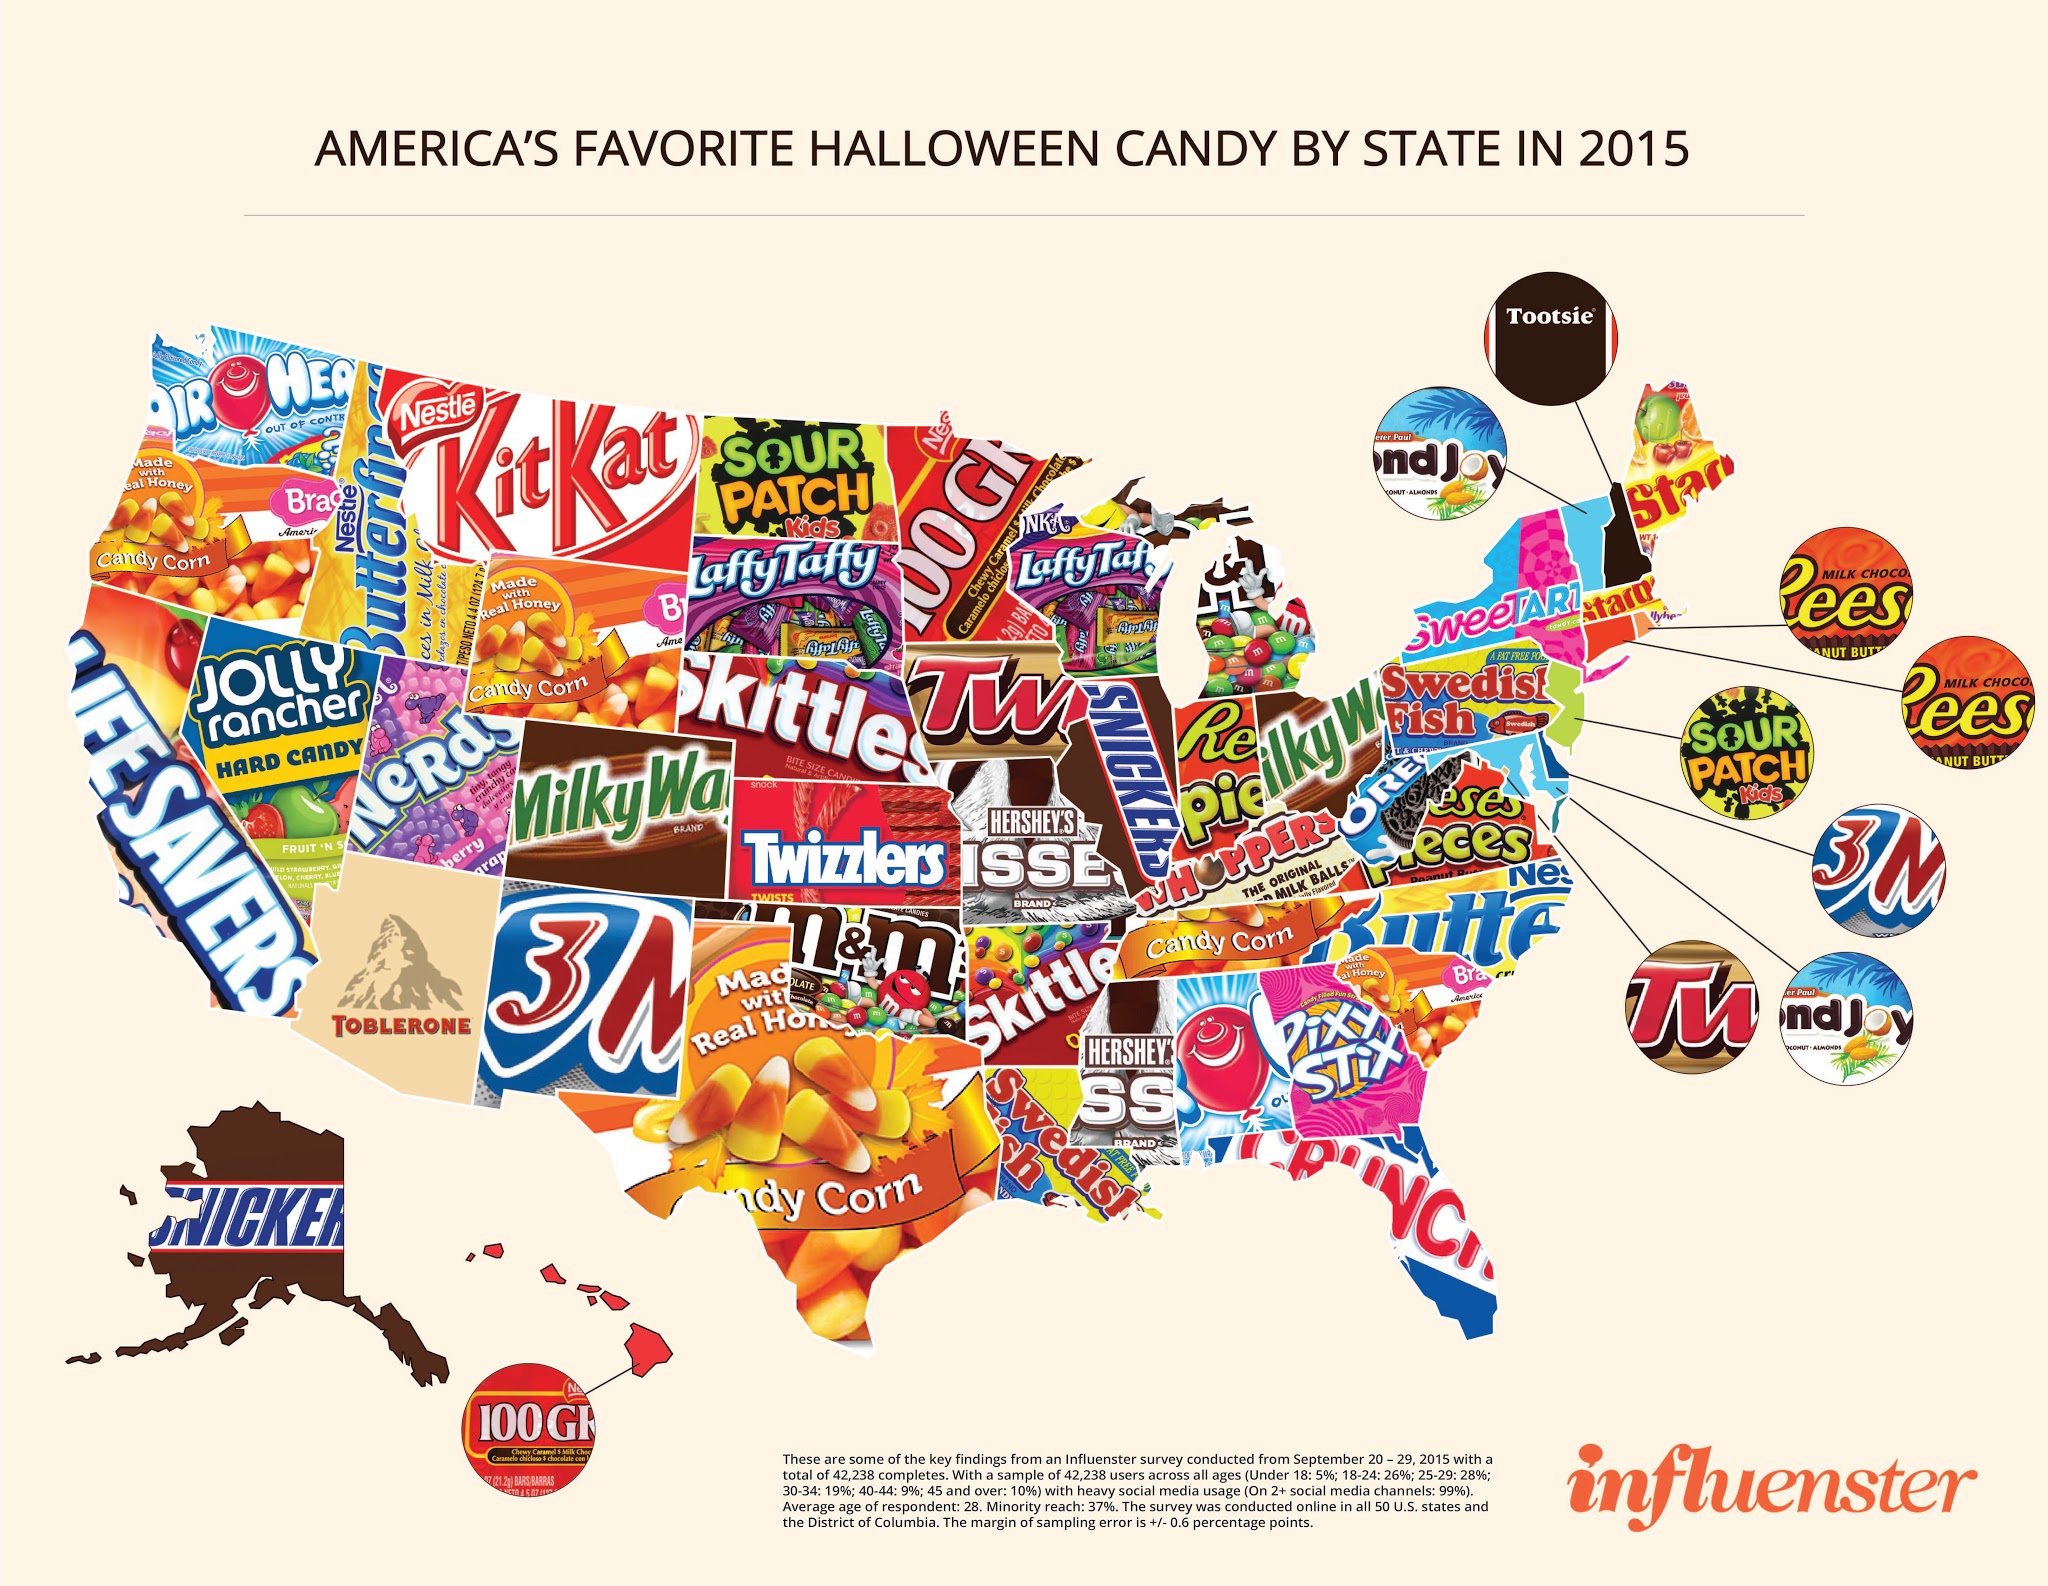 The United States vs. the Candy Corn States